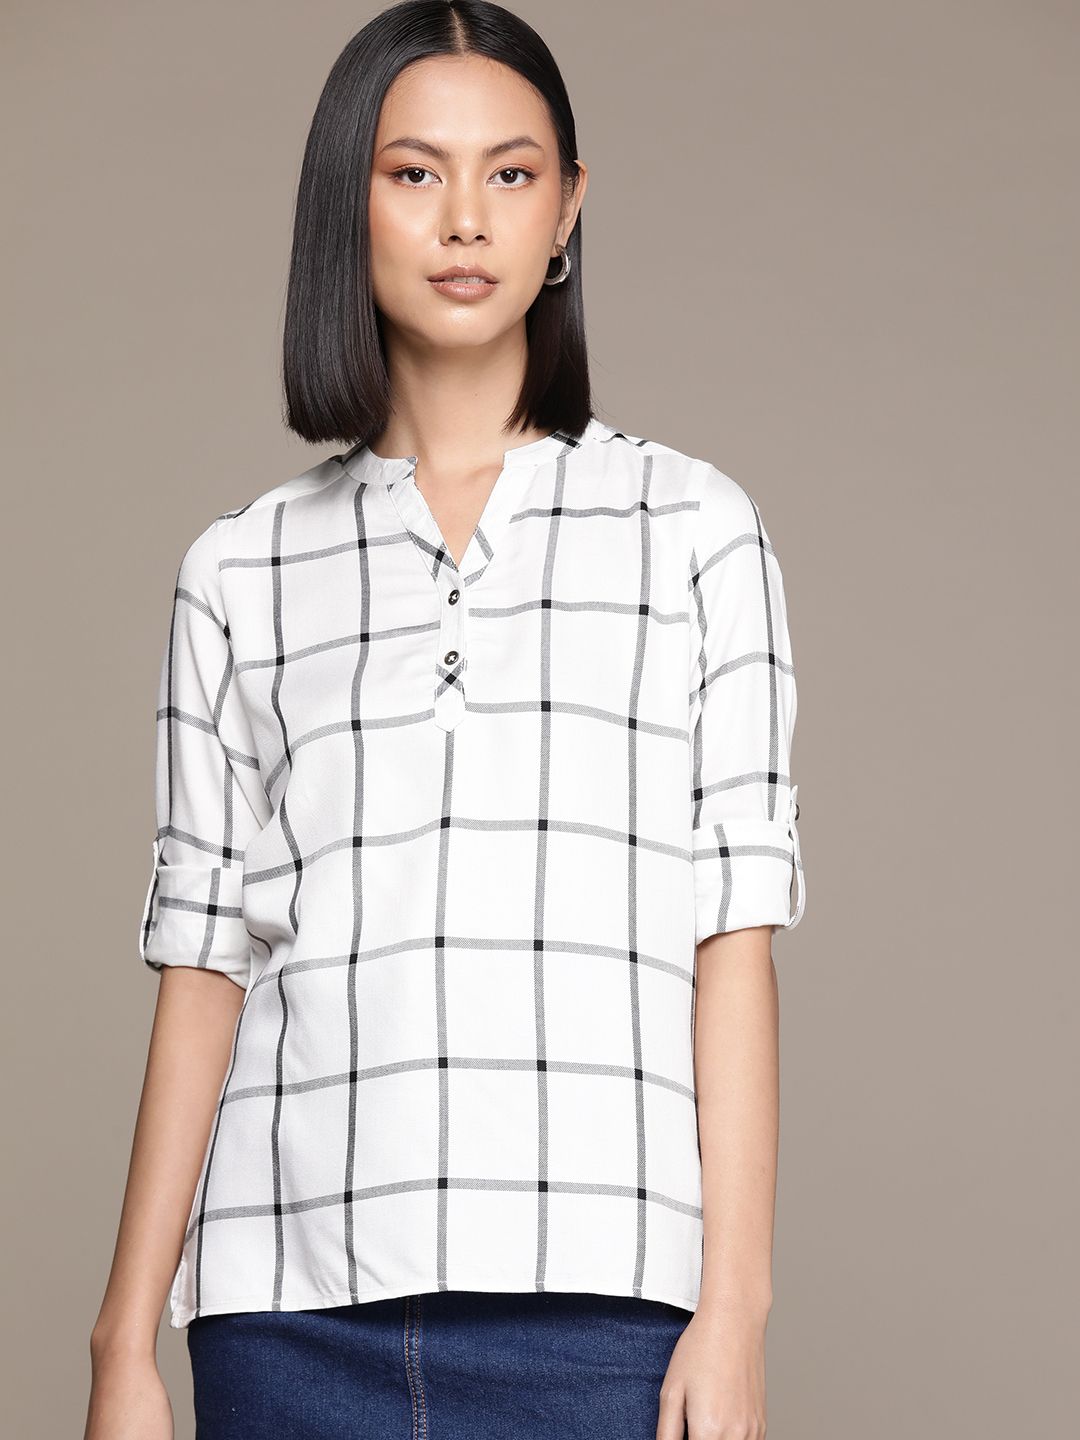 Roadster Checked Mandarin Collar Roll-Up Sleeves Shirt Style Top Price in India